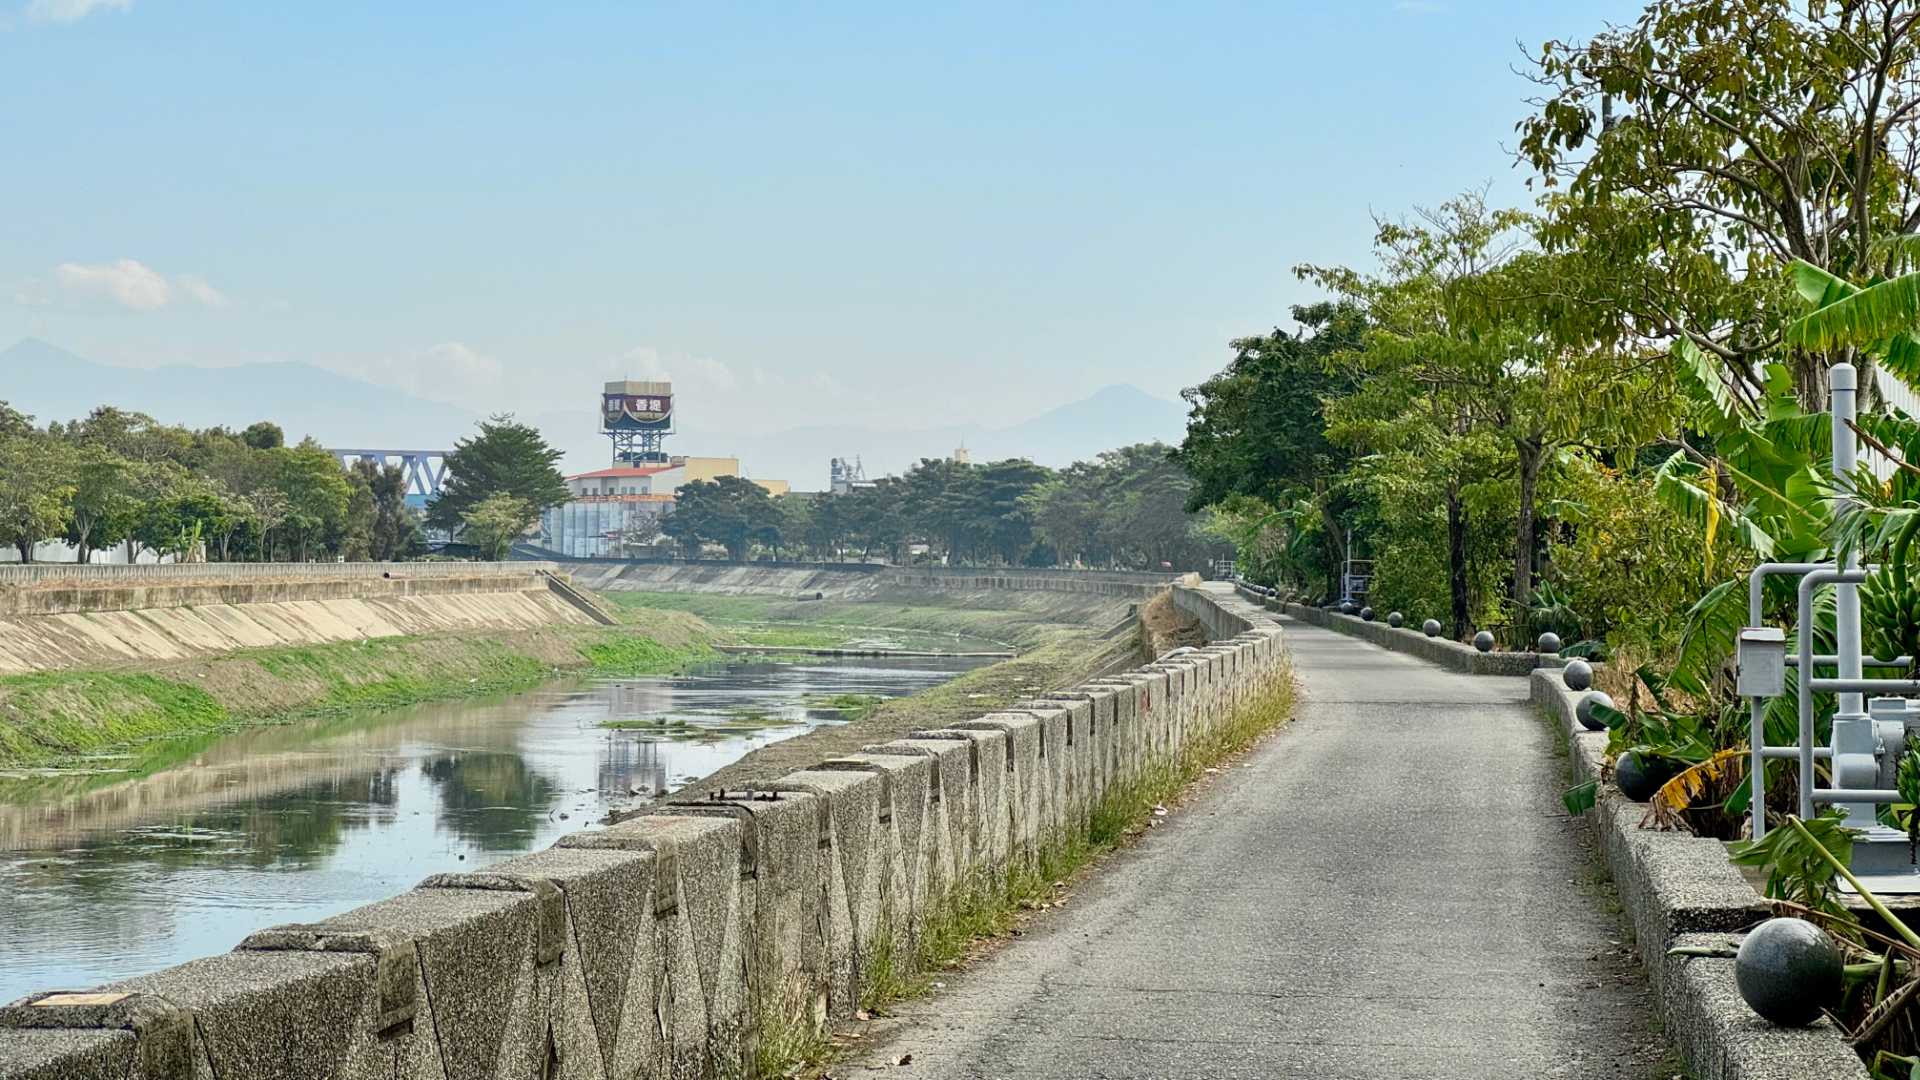 A narrow riverside road (one car-width wide). The river is unattractive, with concrete walls on either side. The area around the river is quite green with trees, including a banana tree in the foreground.